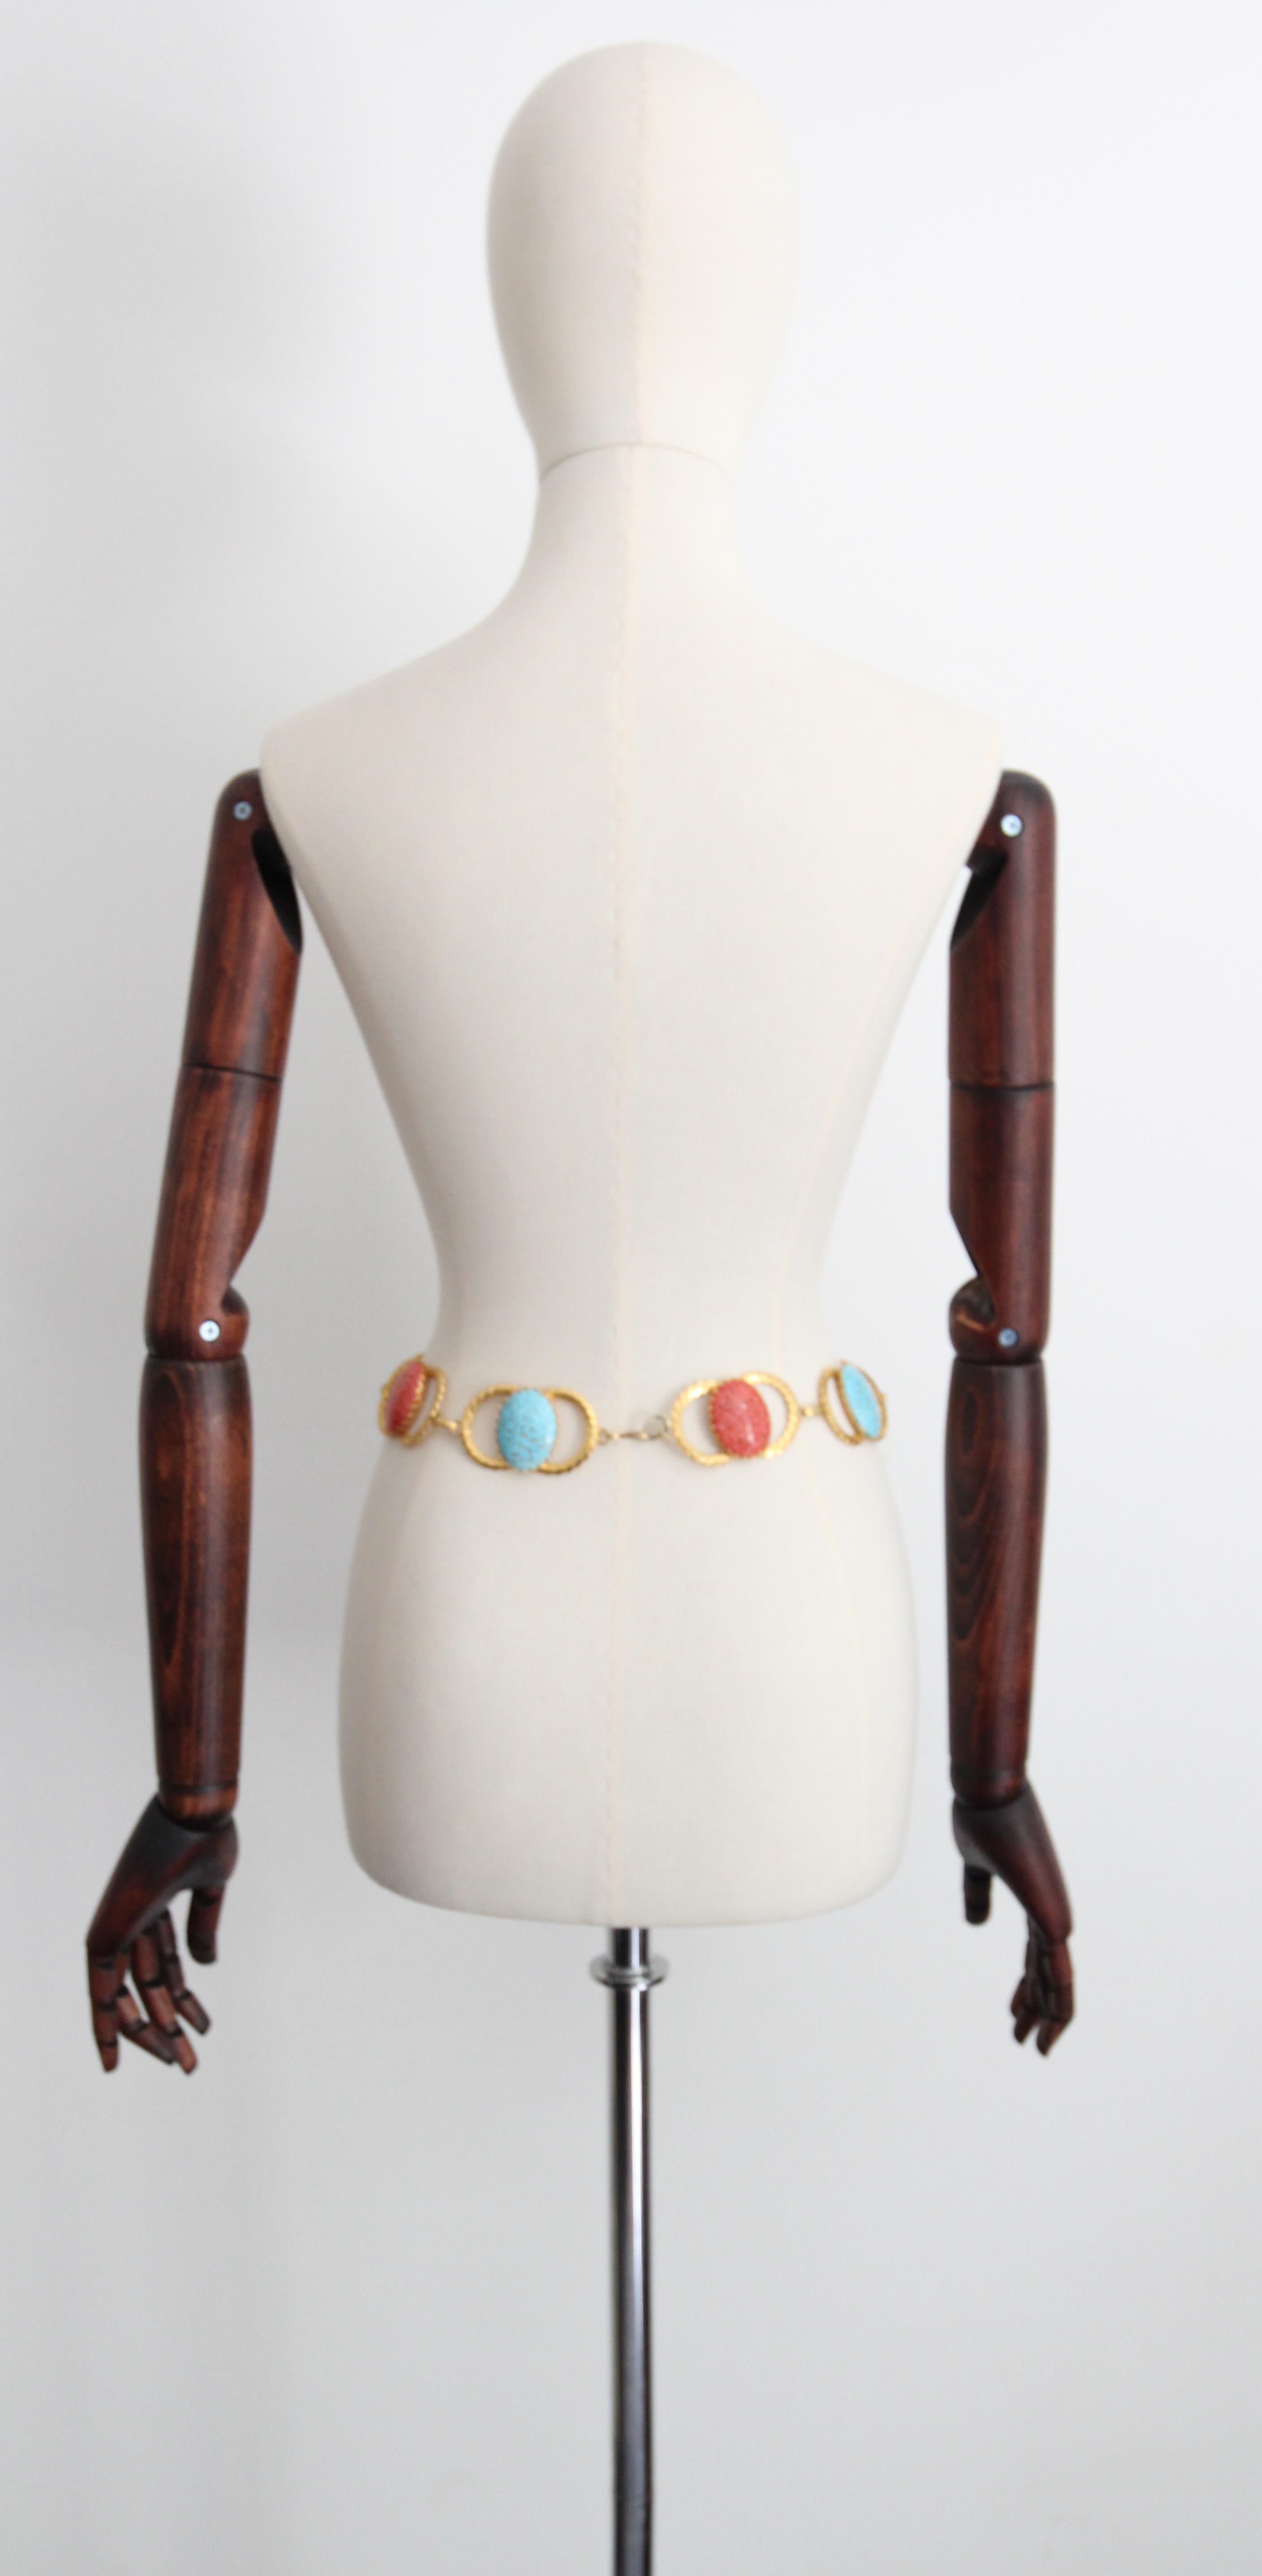 Vintage 1970's coral and turquoise glass cabochons waist chain belt UK 8 US 4 For Sale 5